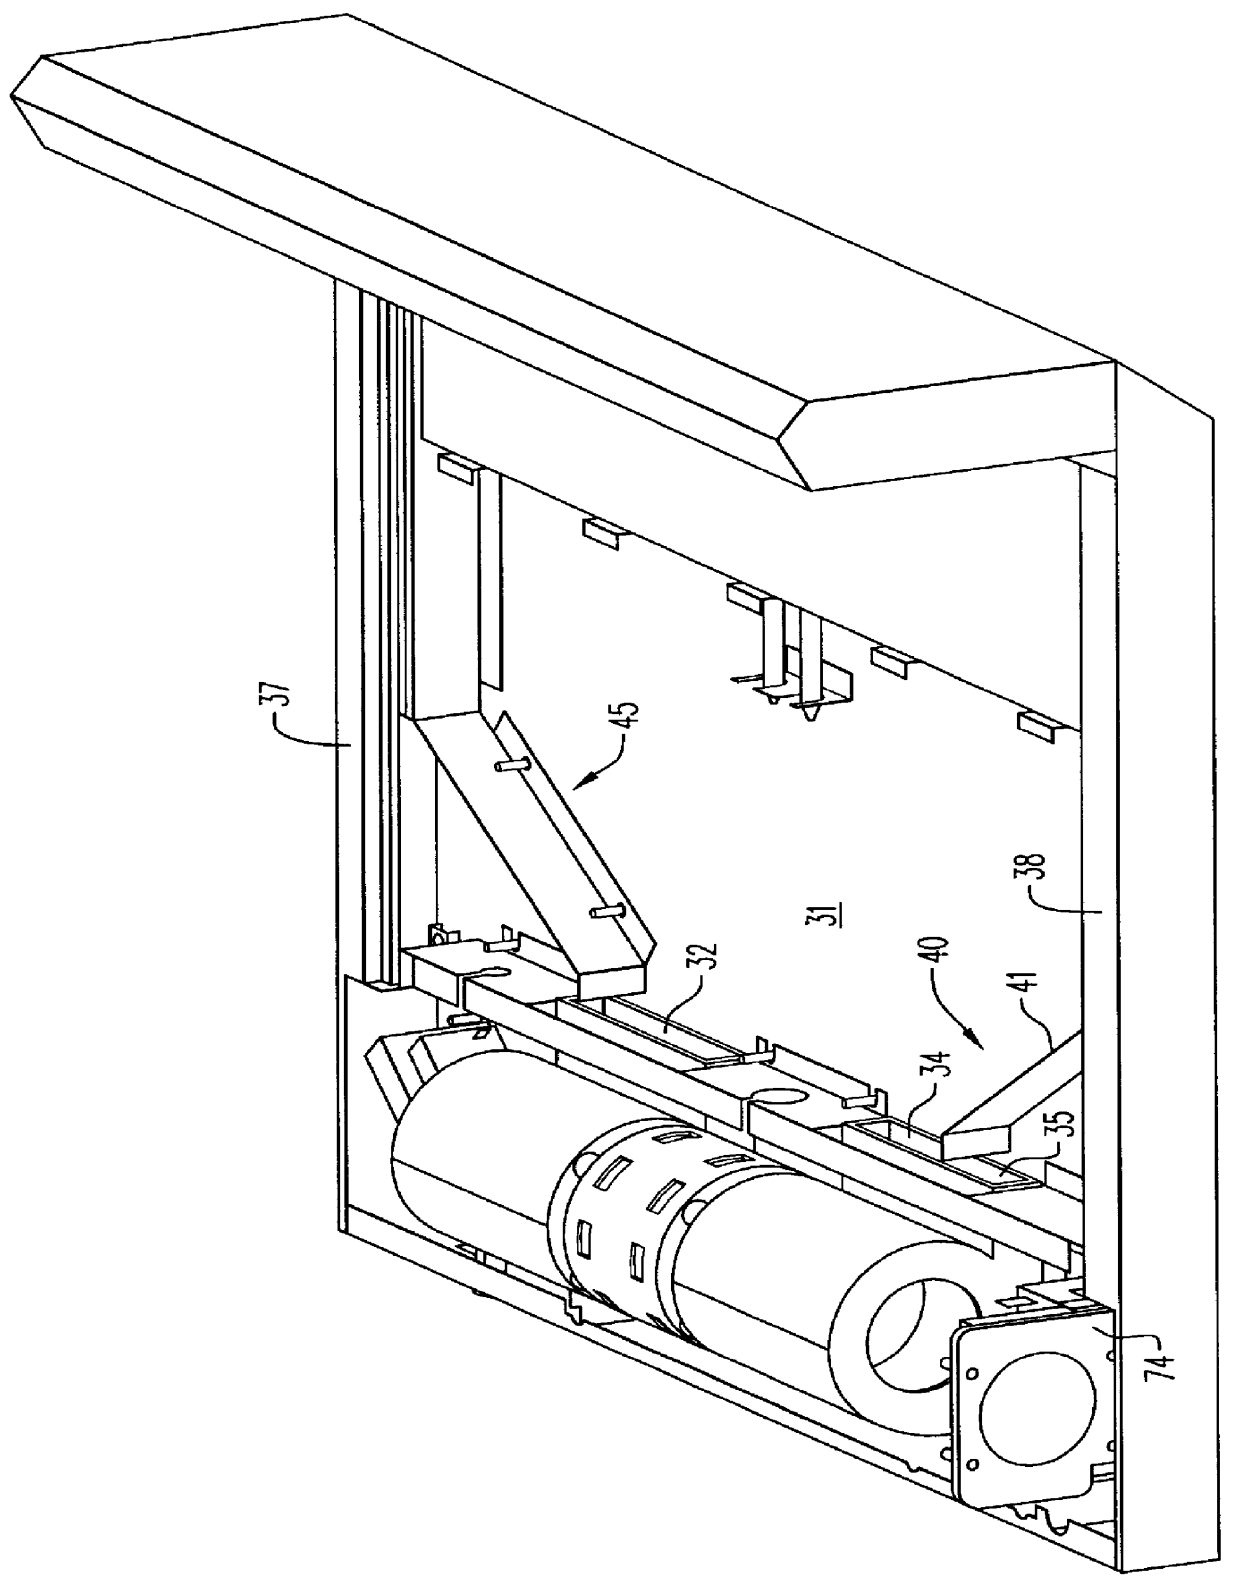 Device and method for keeping food warm